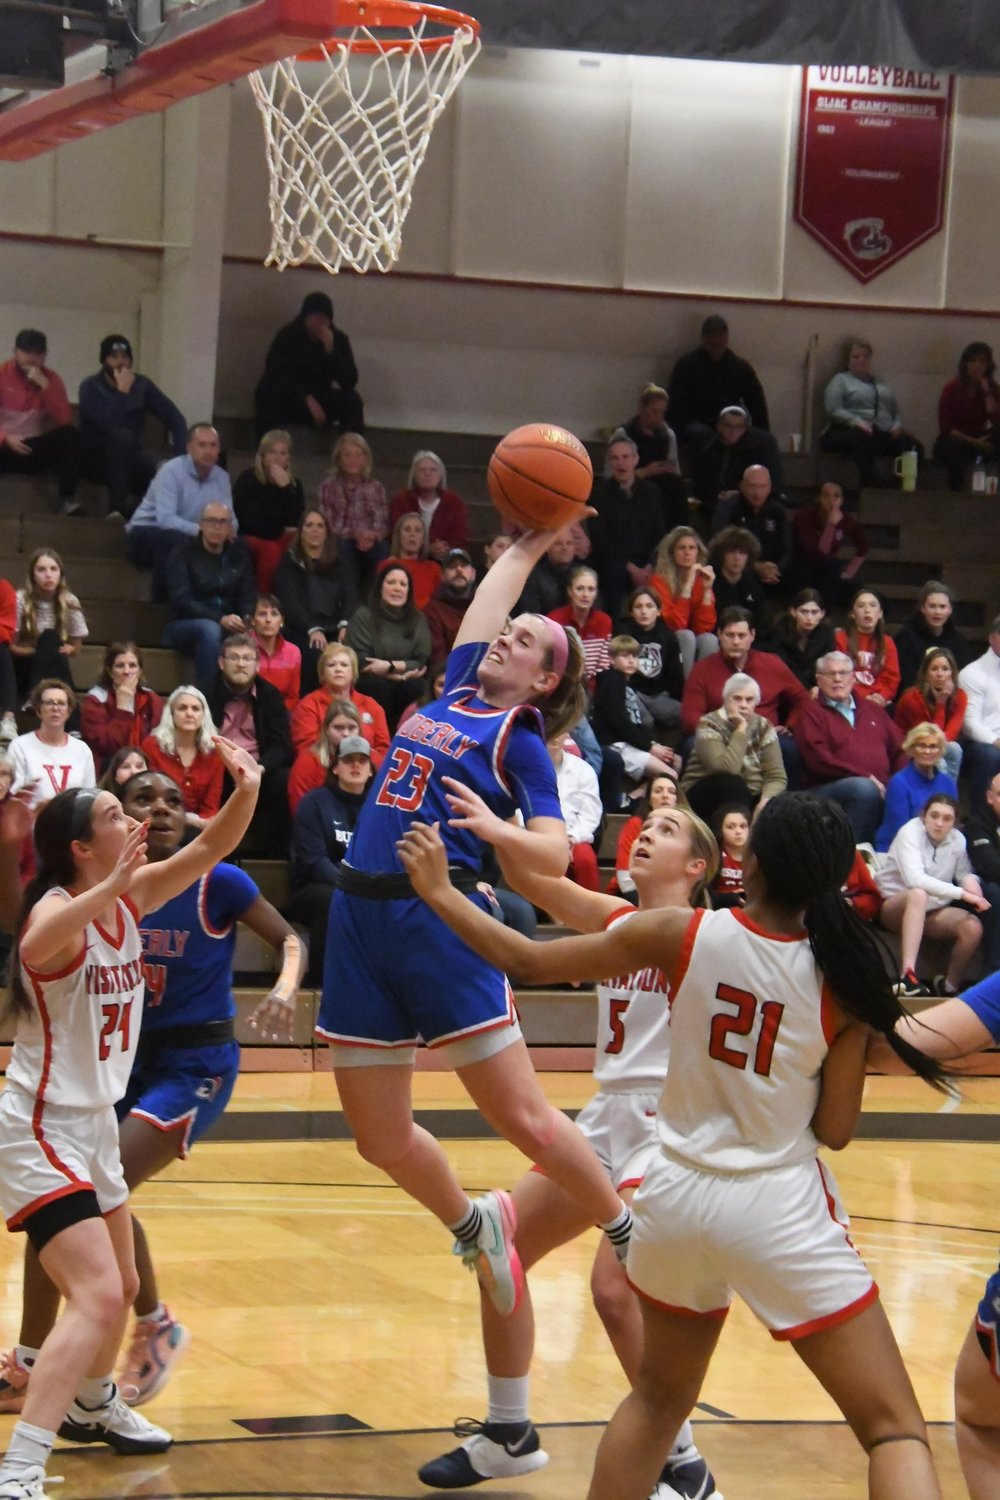 Moberly's Kennedy Messer emphatically grabs a rebound during the Spartans' 55-48 sectional victory over Visitation Academy at Maryville University's Moloney Gymnasium in Town & Country.